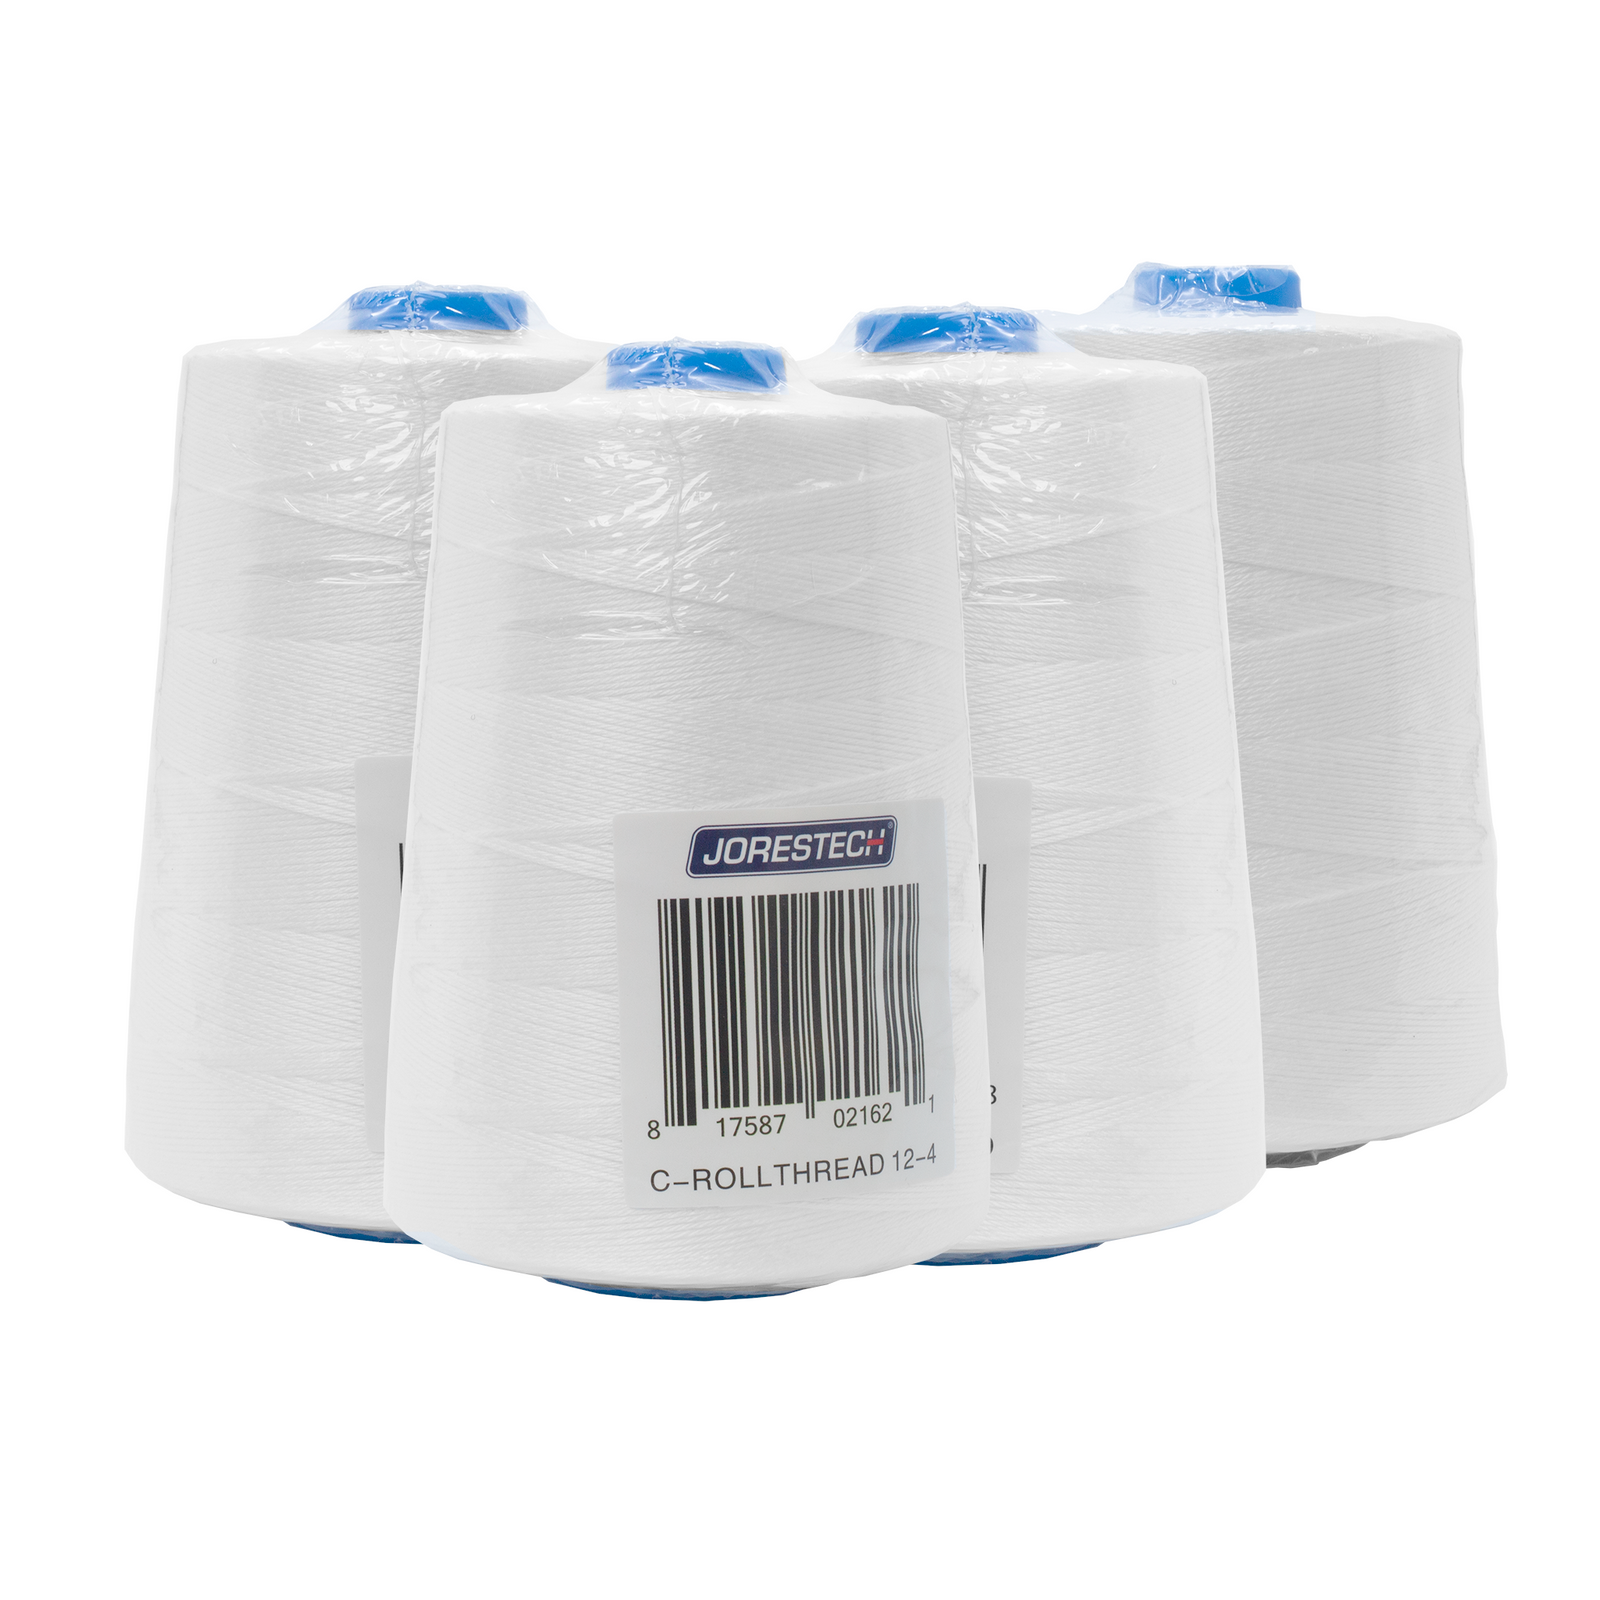 group of four white JORESTECH sewing thread spools wrapped in protective plastic for dirt protection